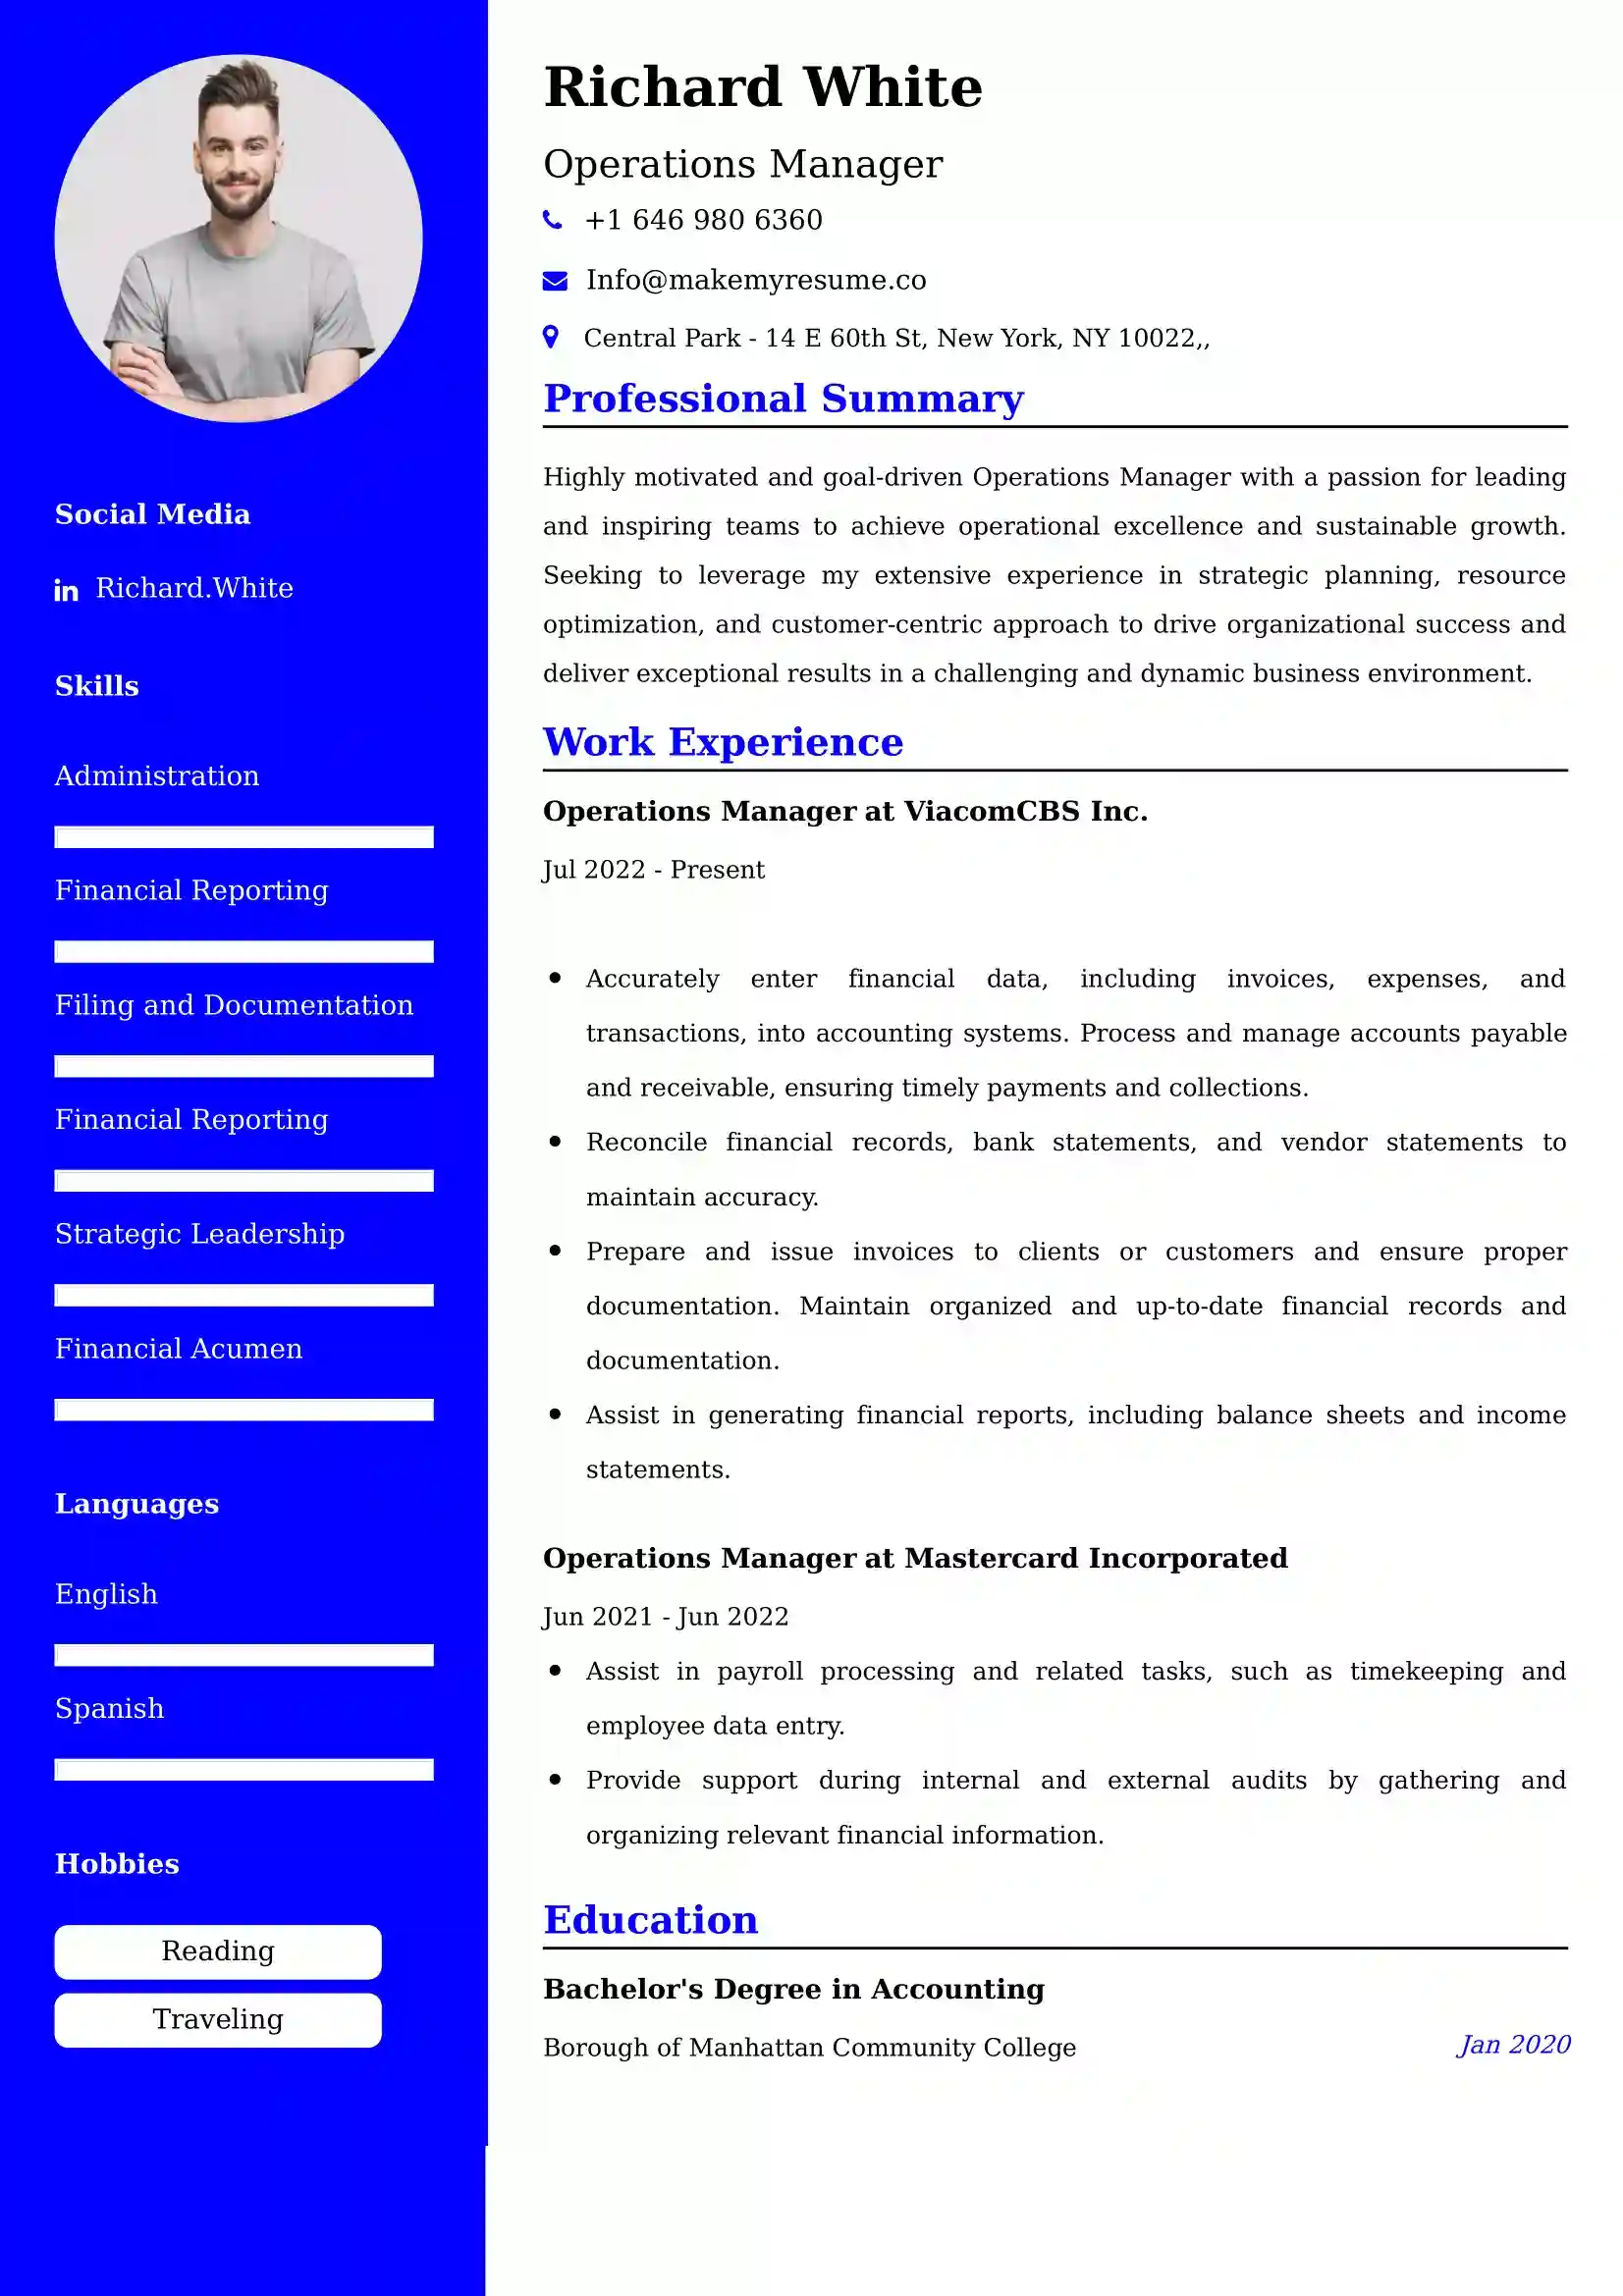 Operations Manager CV Examples Malaysia